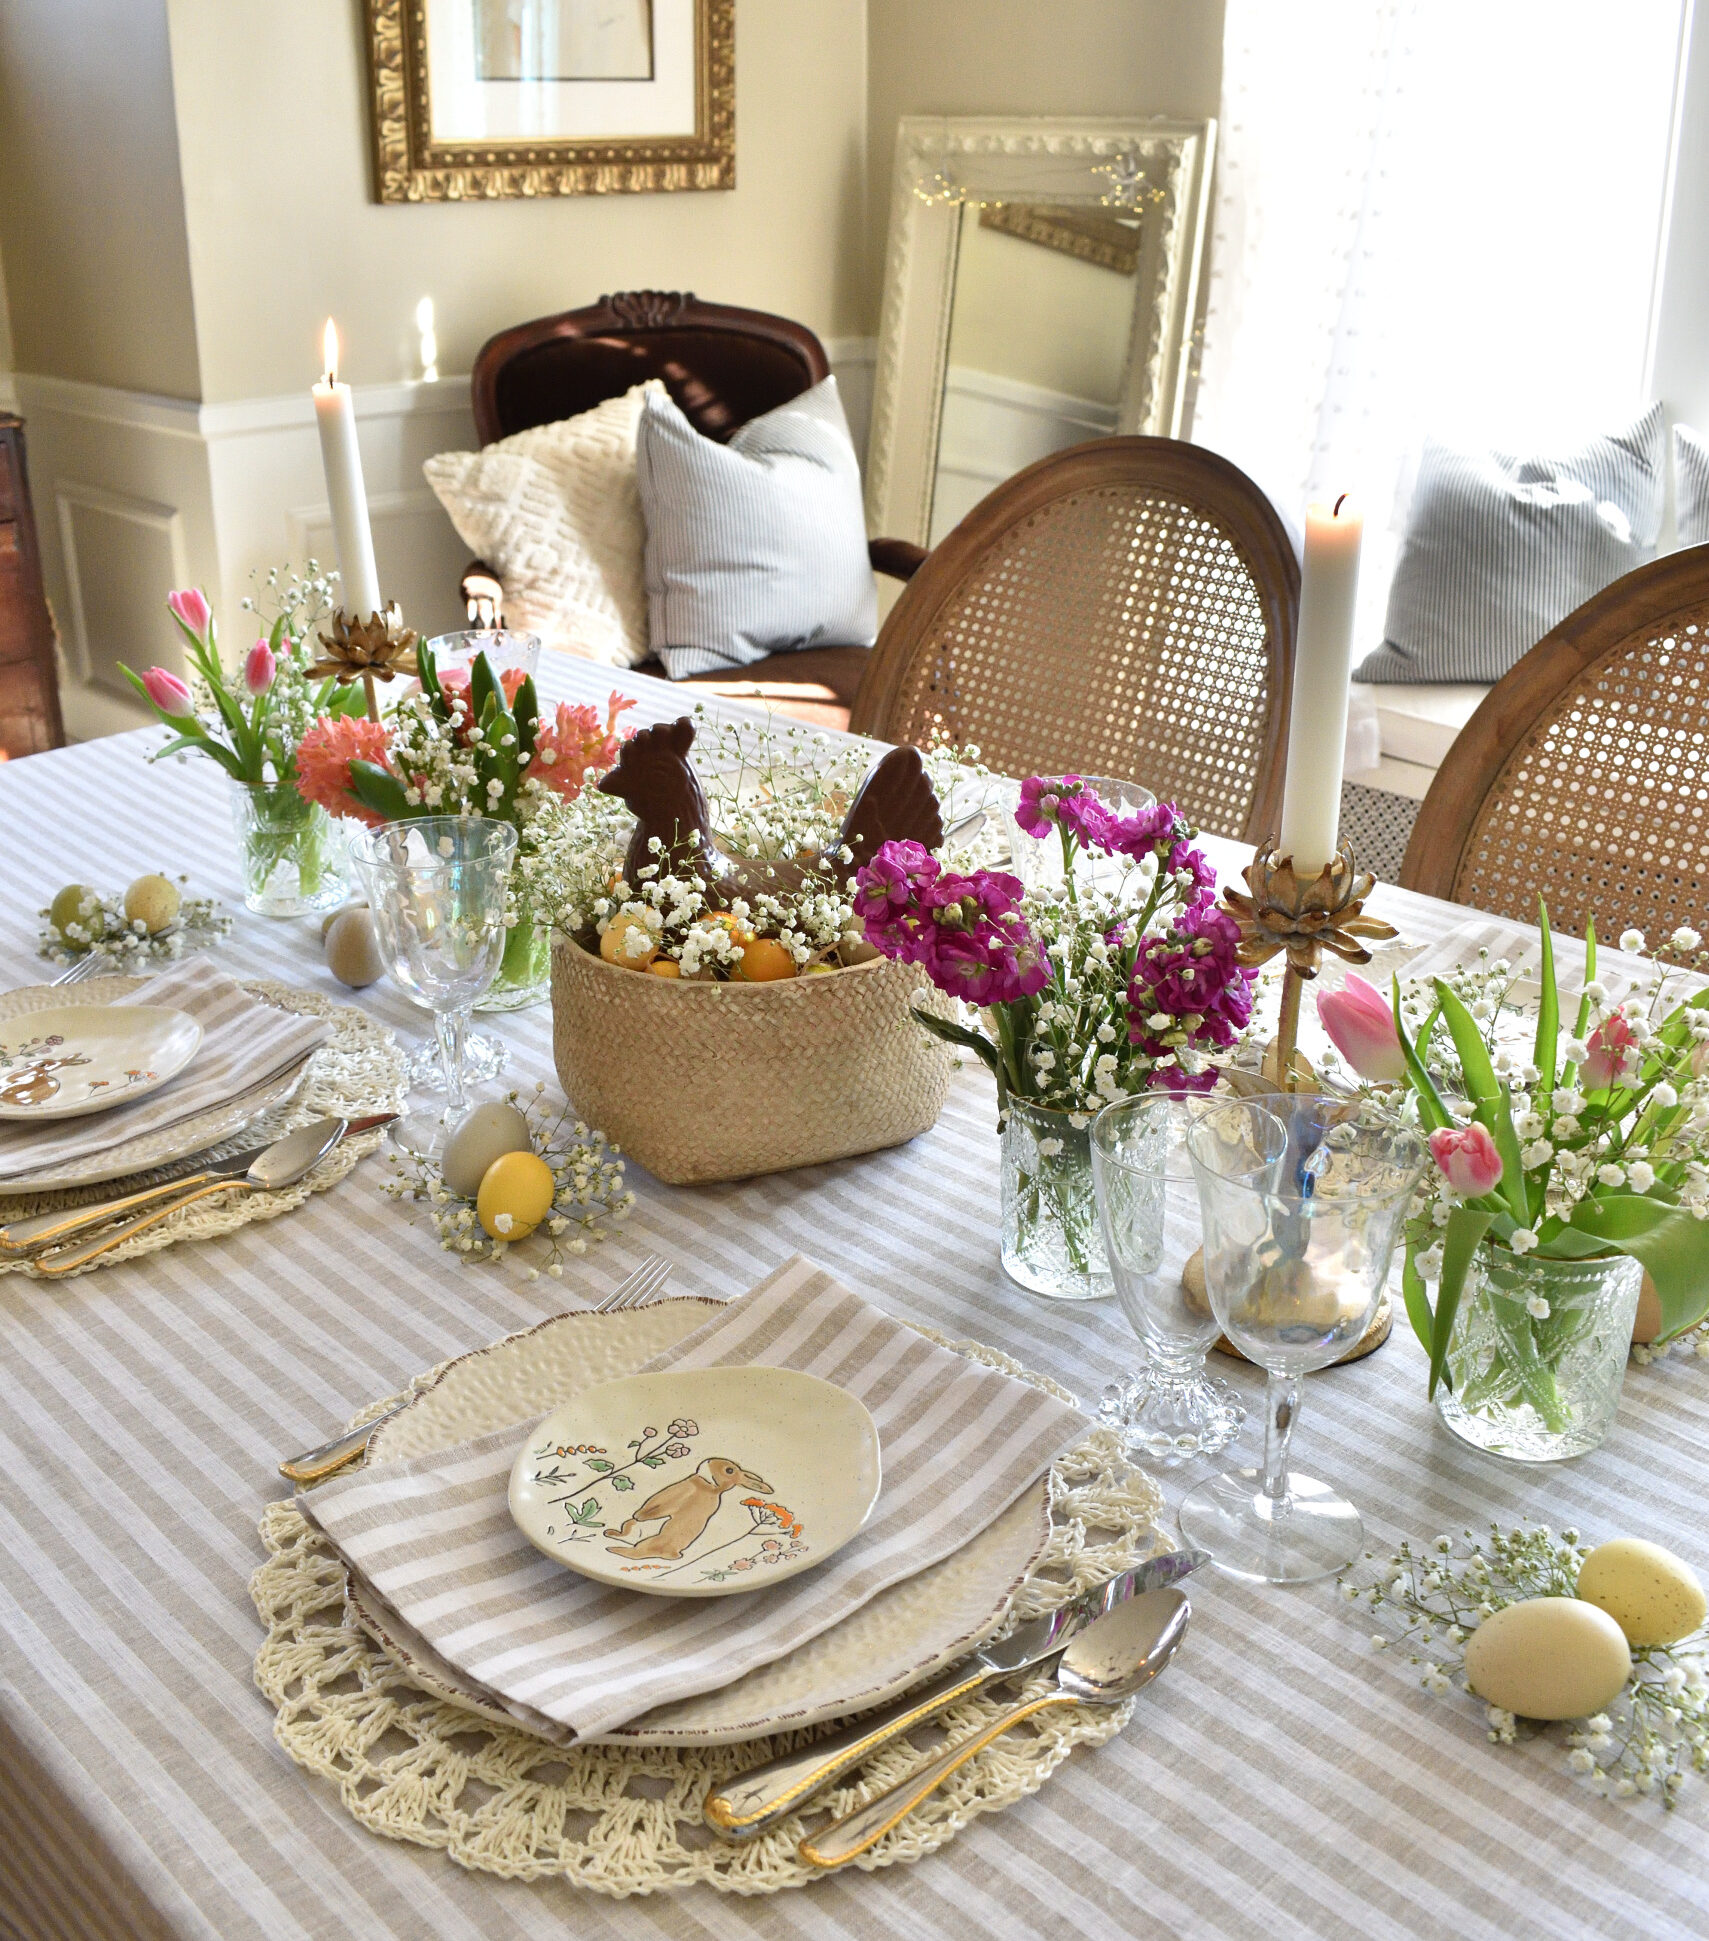 dainty spring flowers on the Easter table